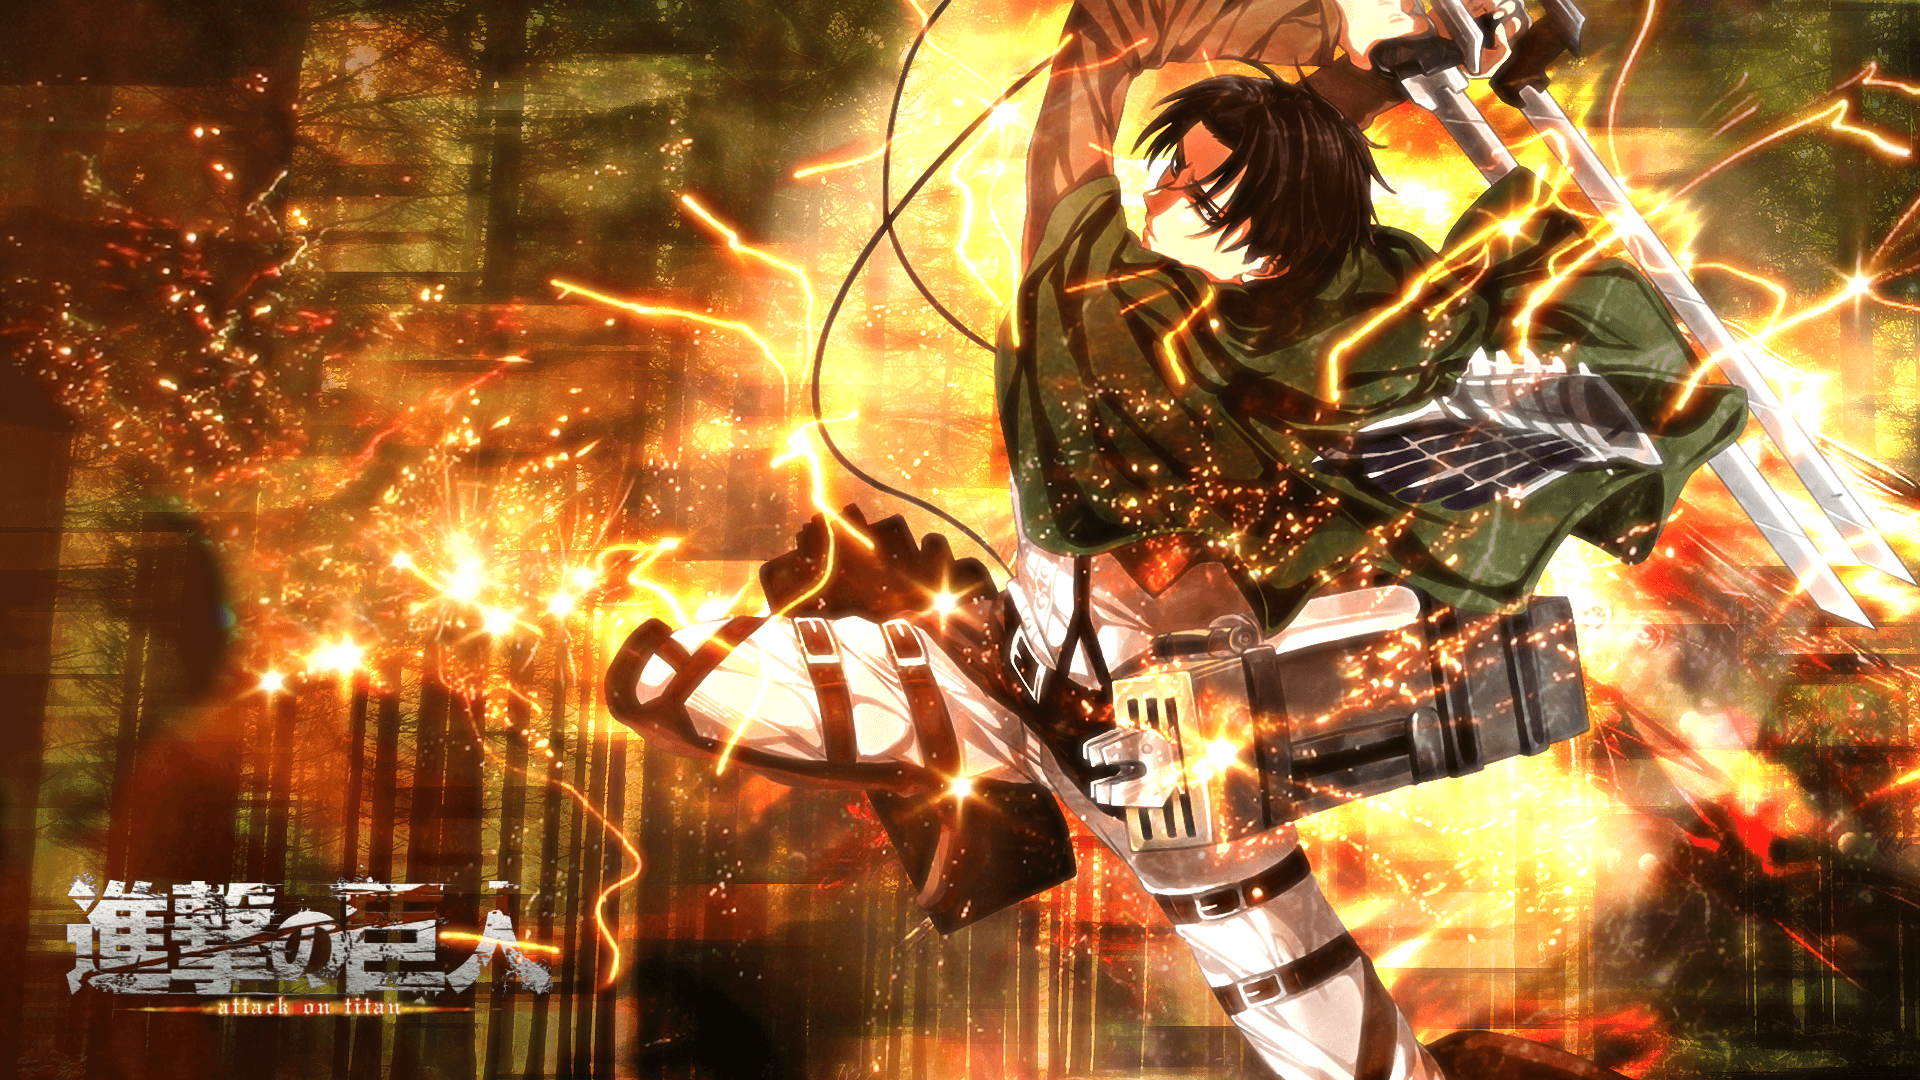 8 Fantastic Attack on Titan Wallpapers